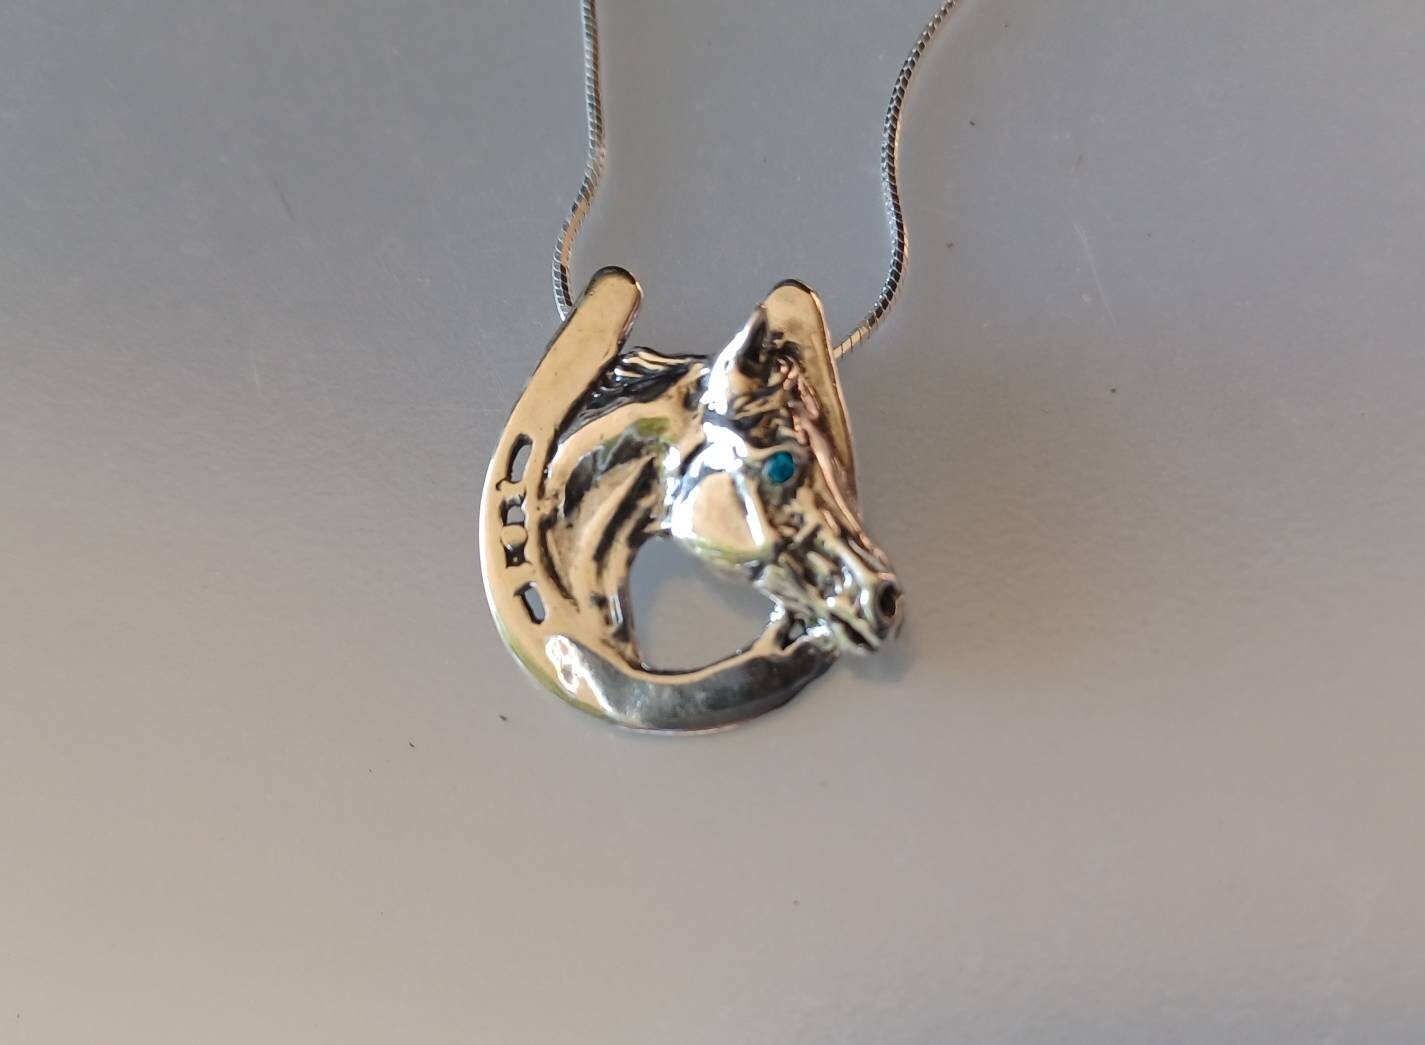 Horse in horseshoe  pendant with stone eye & chain  sterling silver  Forge Hill Sculpture jewelry